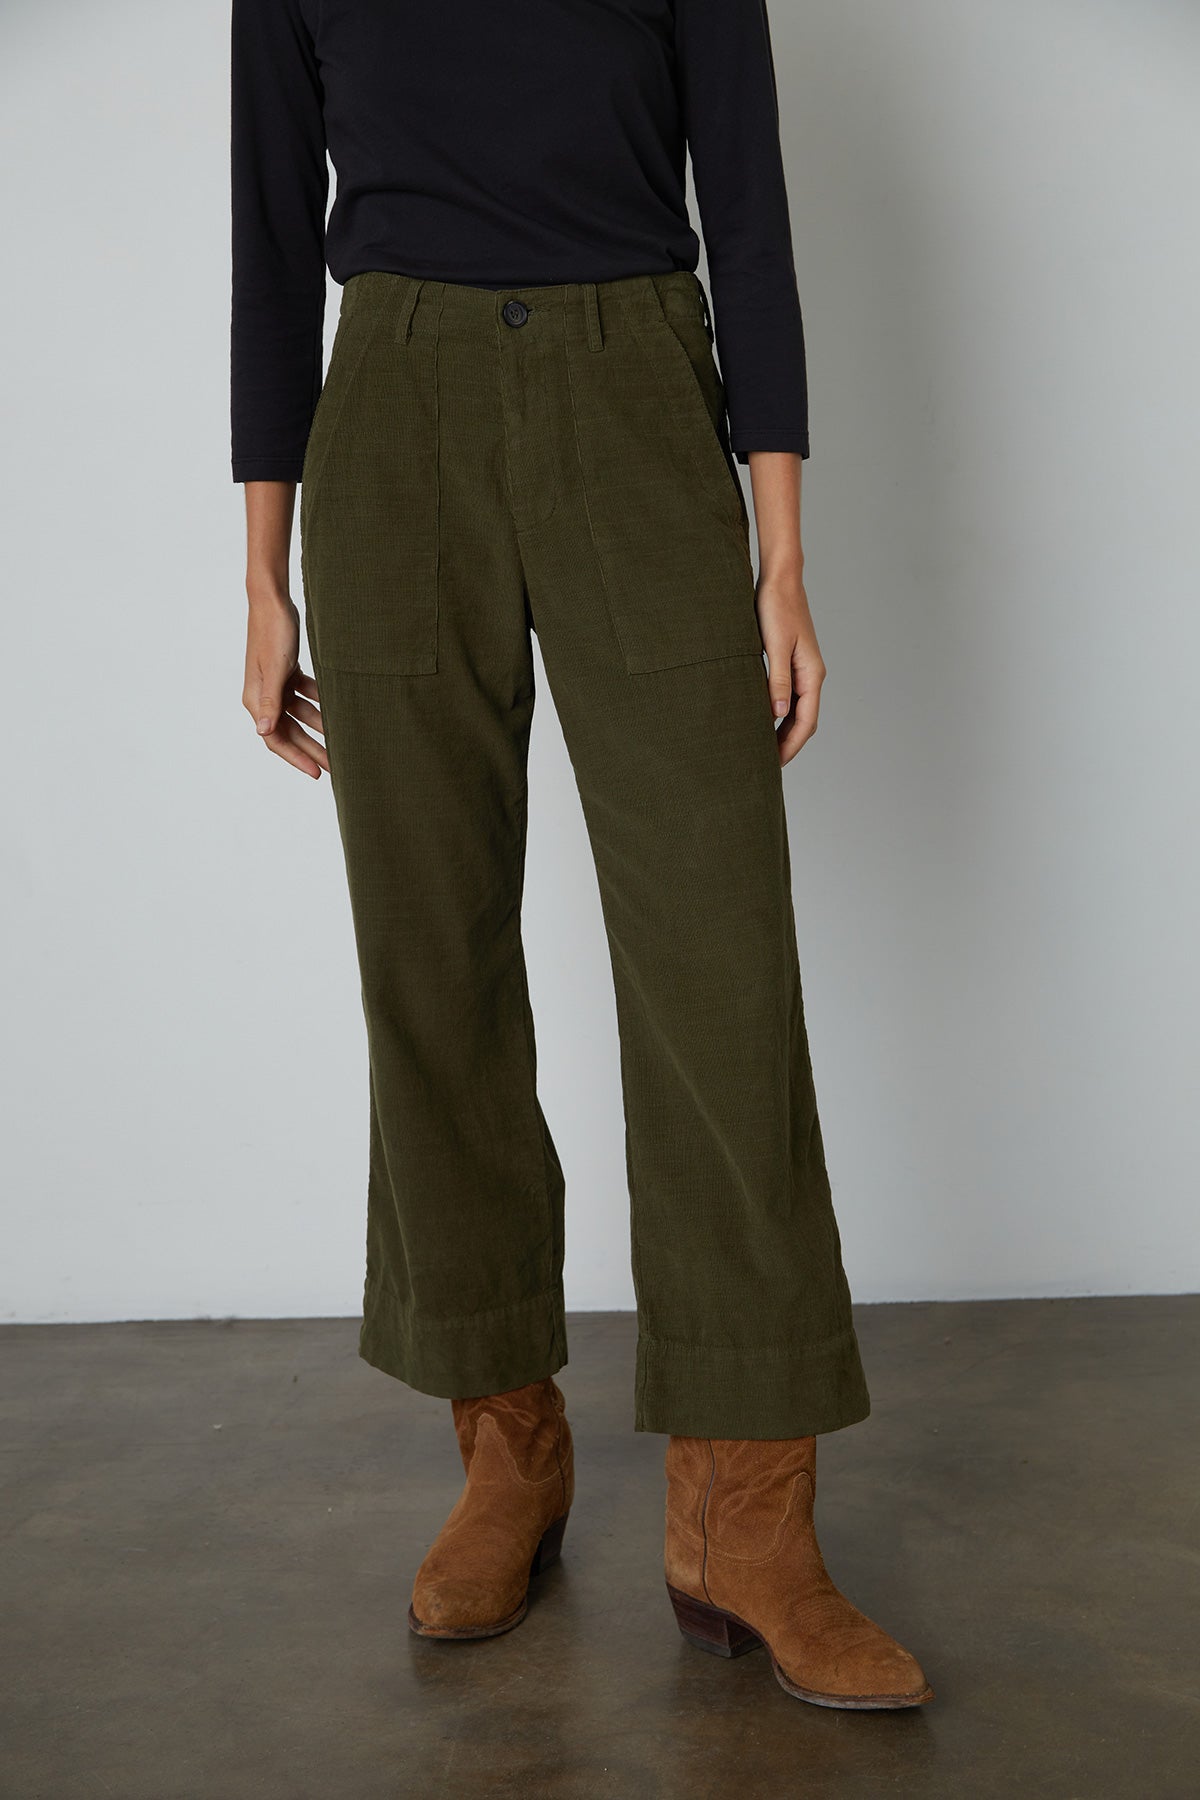 Vera Corduroy Wide Leg Pant in Aloe front standing with boots-26654355161281